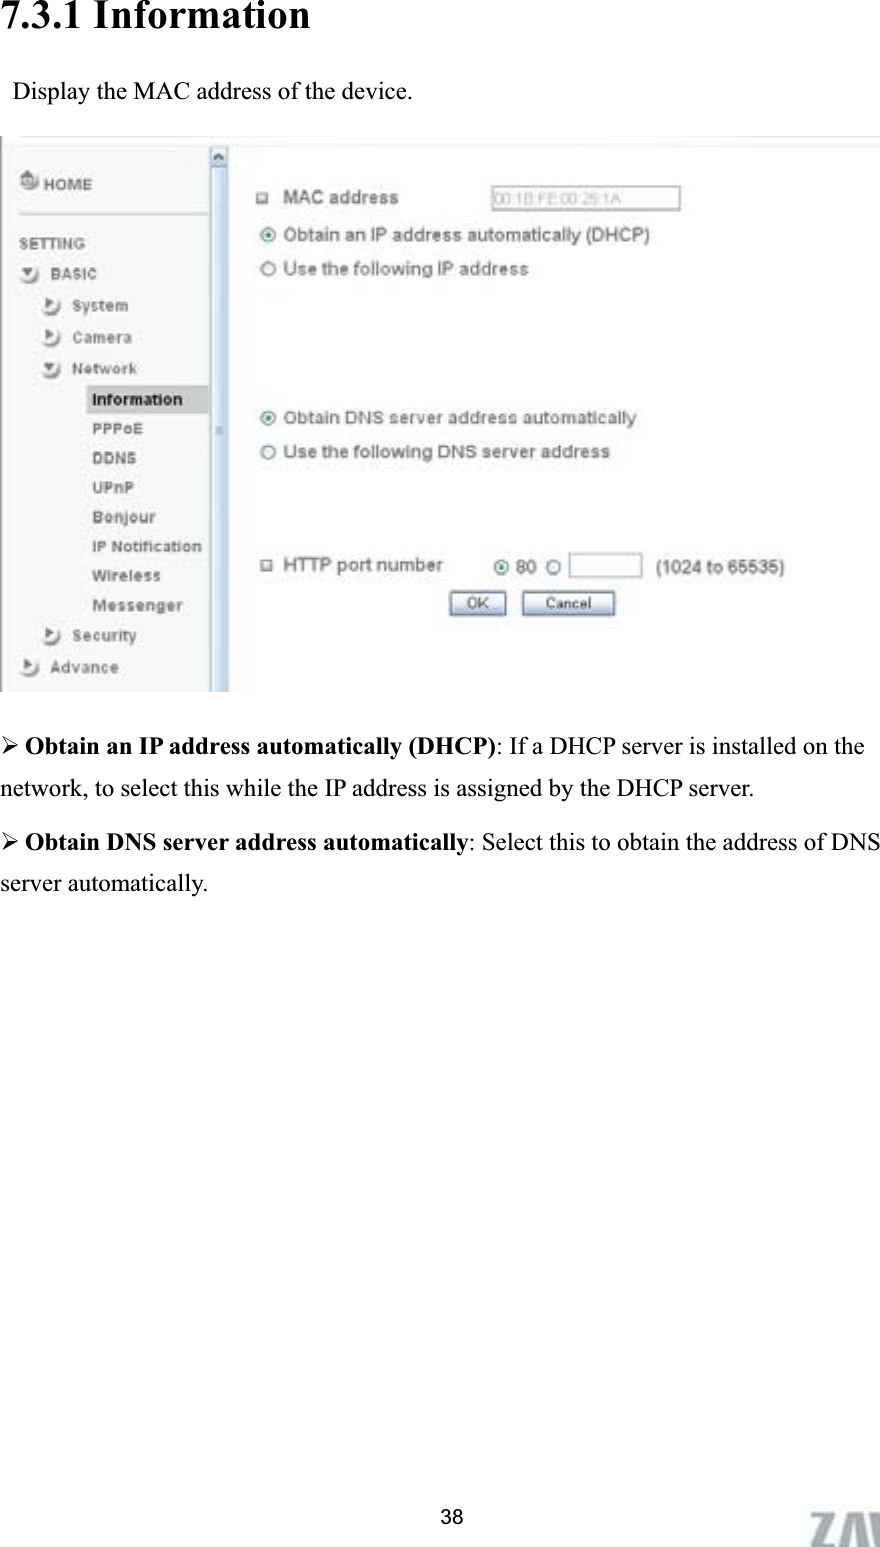      7.3.1 Information   Display the MAC address of the device. ¾Obtain an IP address automatically (DHCP): If a DHCP server is installed on the network, to select this while the IP address is assigned by the DHCP server.   ¾Obtain DNS server address automatically: Select this to obtain the address of DNS server automatically. 38